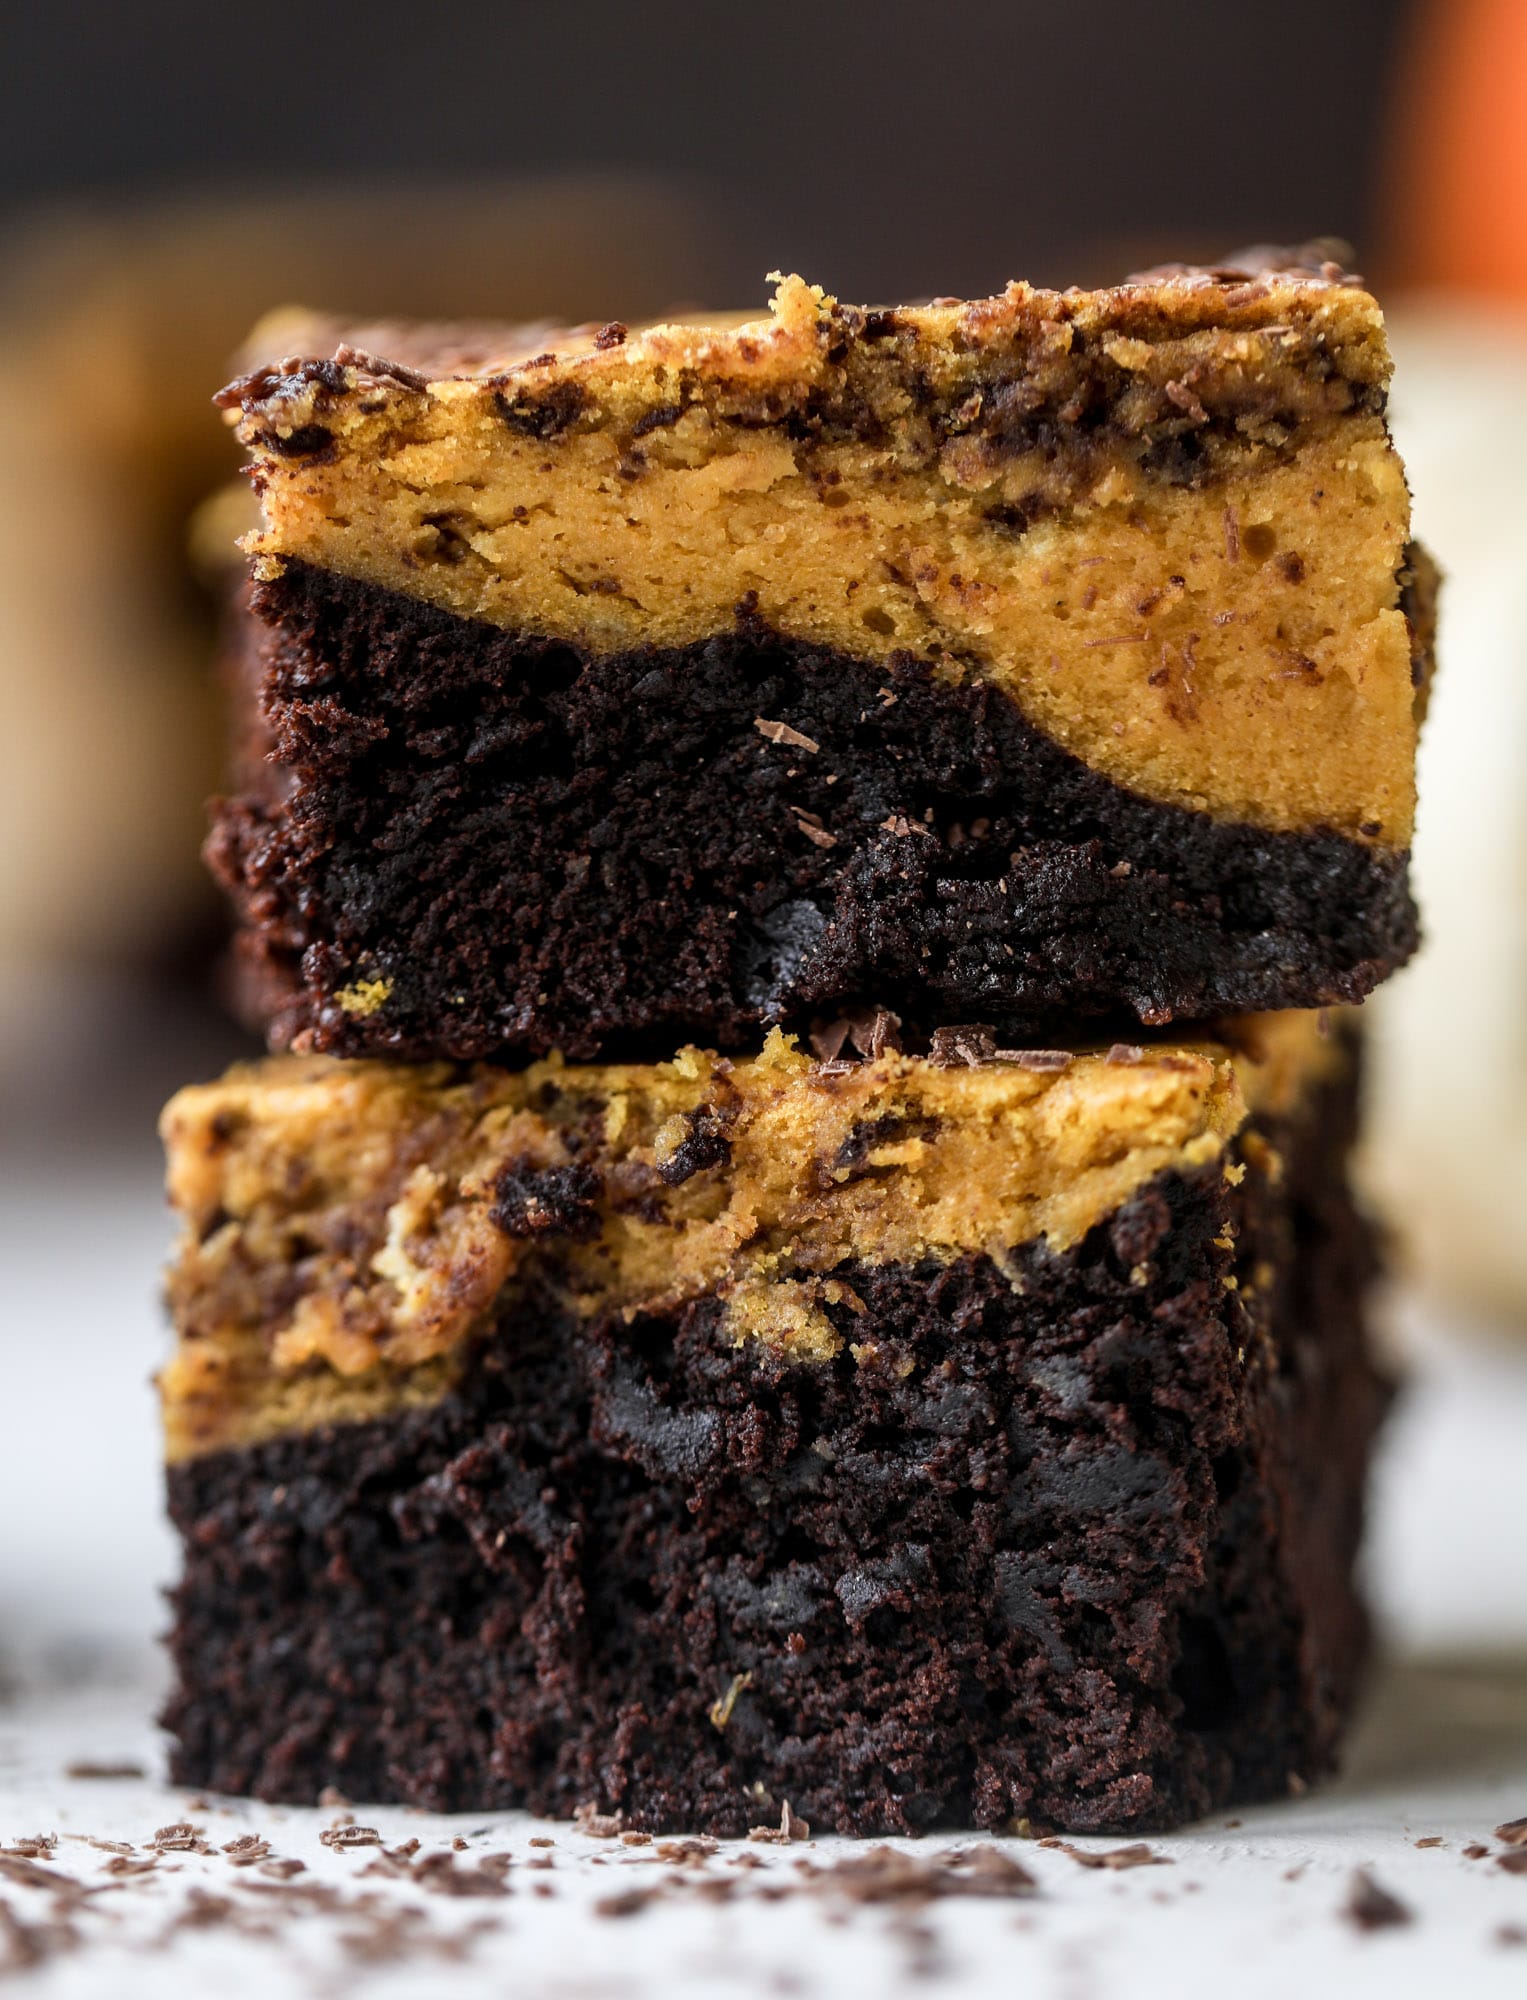 These pumpkin brownies have a fudgy layer of chocolate on the bottom and a silky layer of pumpkin on top! They are so delicious and rich and perfect for fall. The pumpkin brownies come together easily and can be made ahead of time too! I howsweeteats.com #pumpkin #brownies